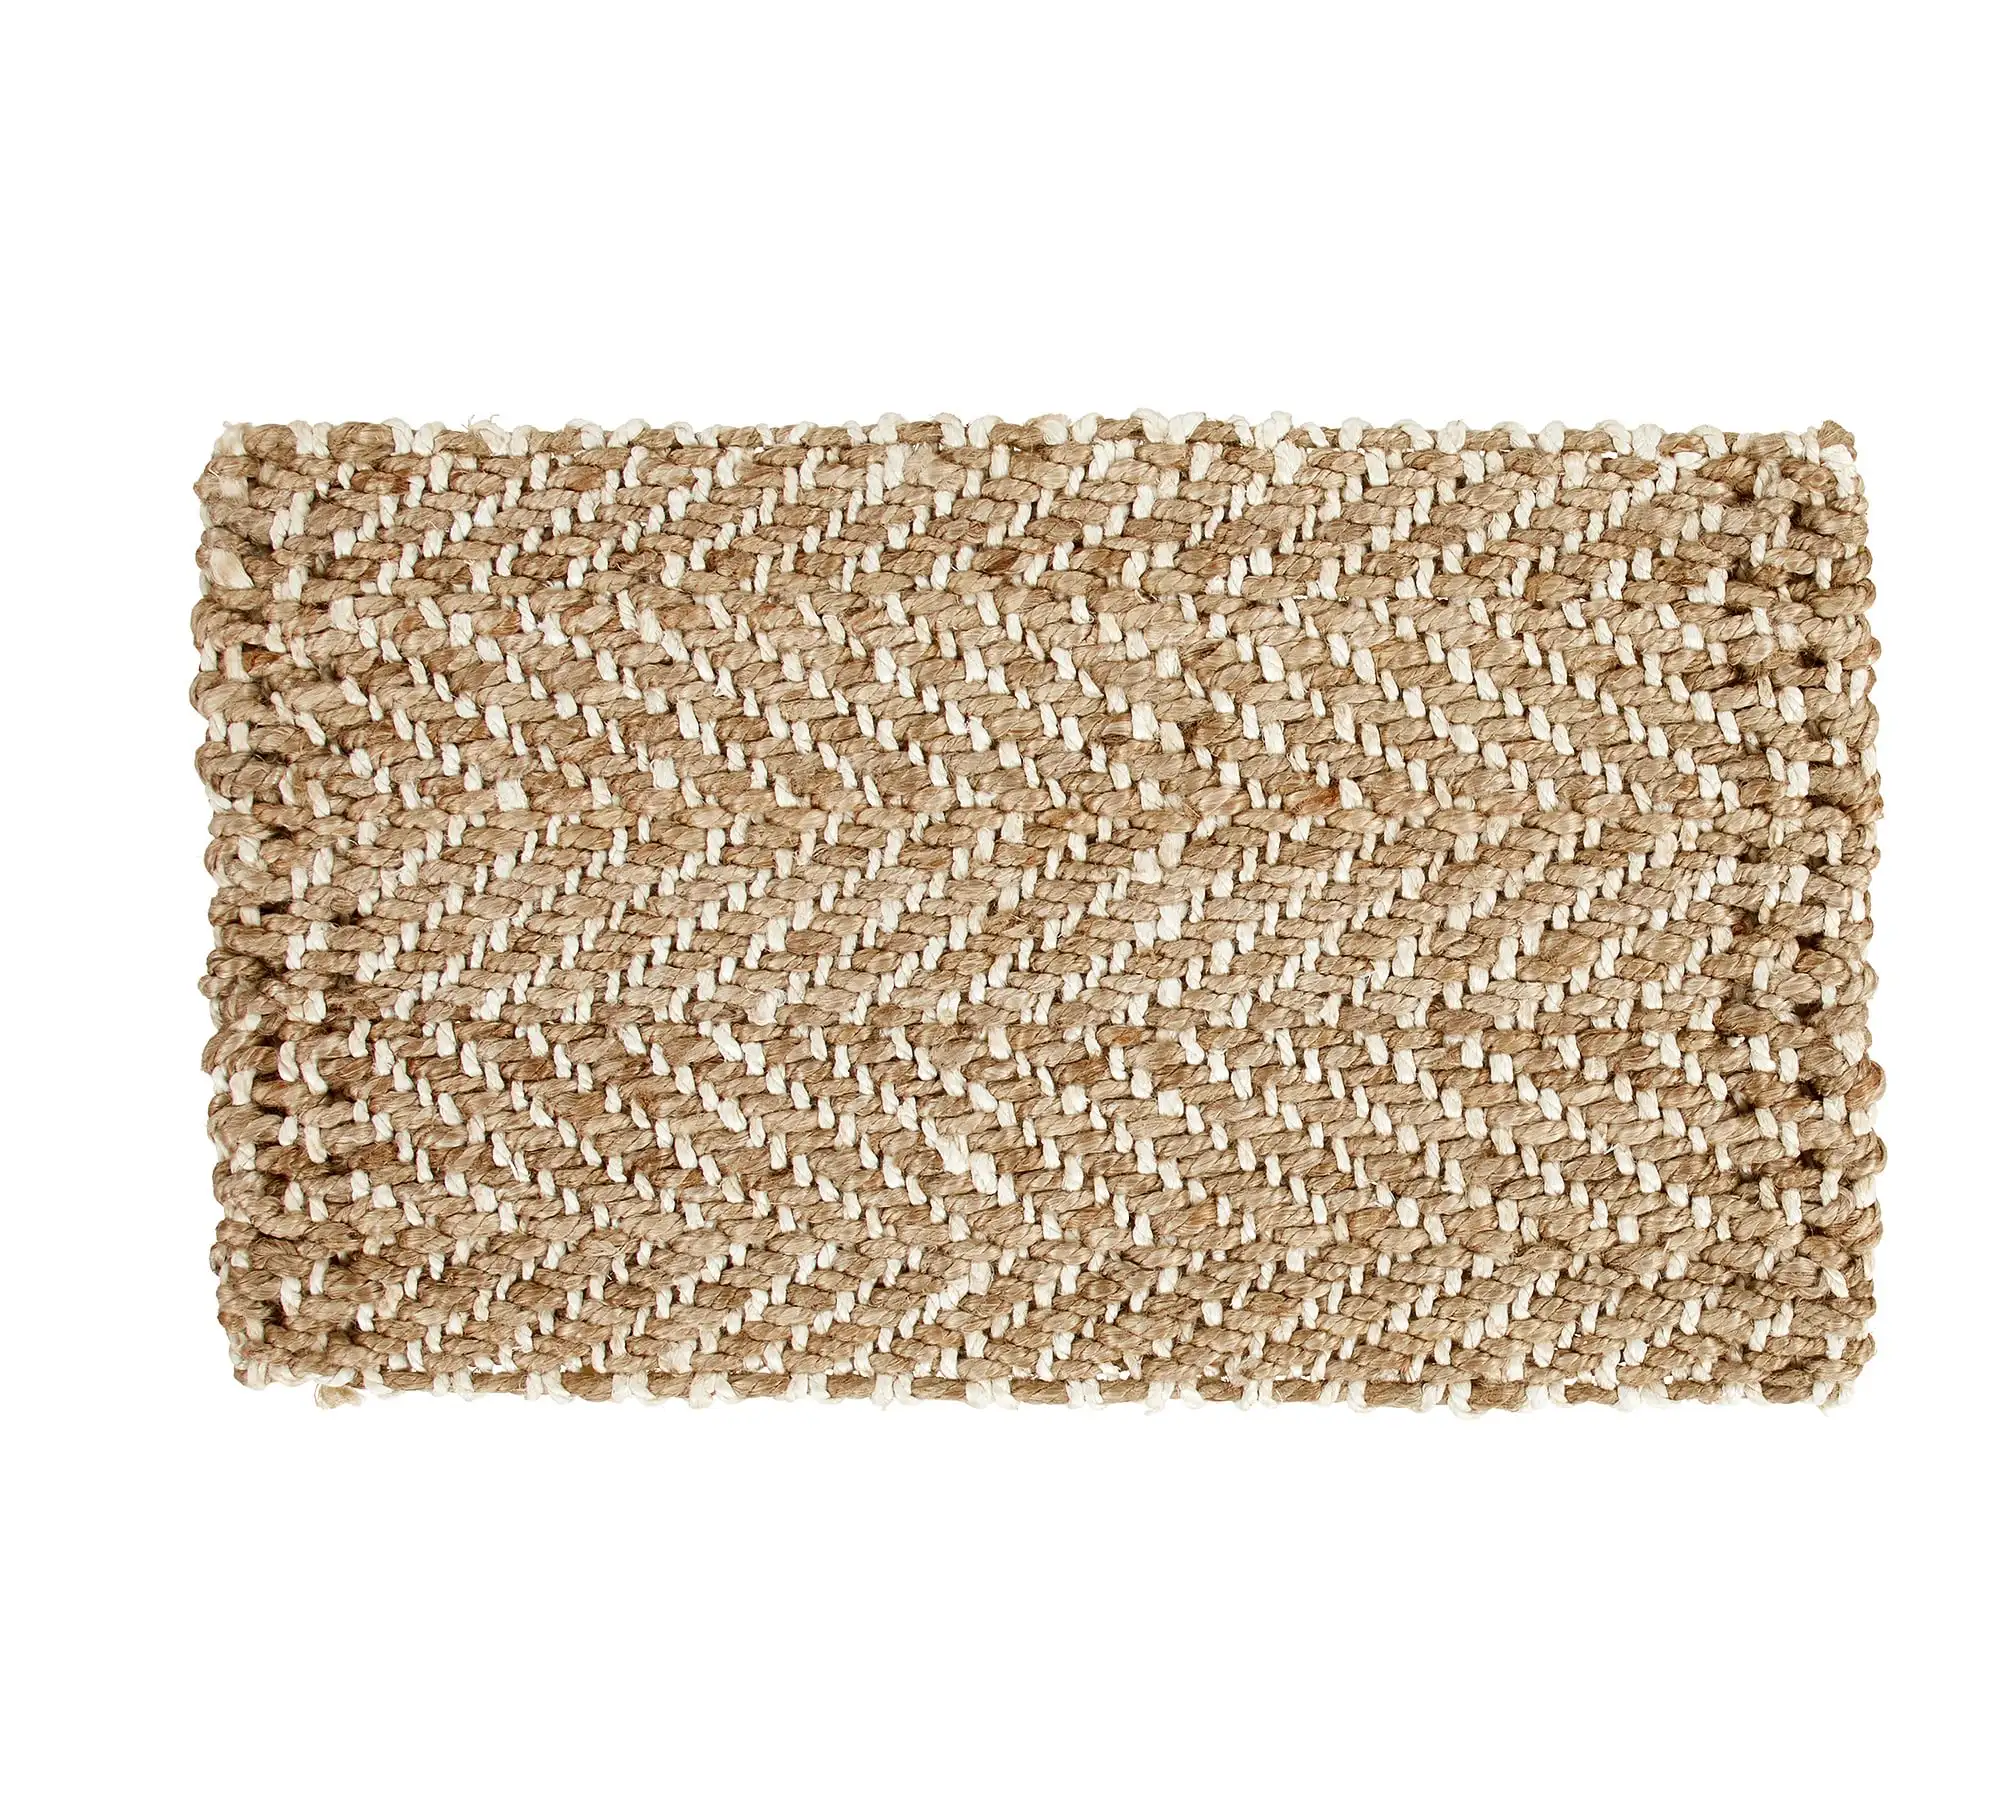 Handwoven Natural Seagrass Rug Rectangle Carpet For Living Room Bedroom Hallway Door Mat Area Rug For Home And Office